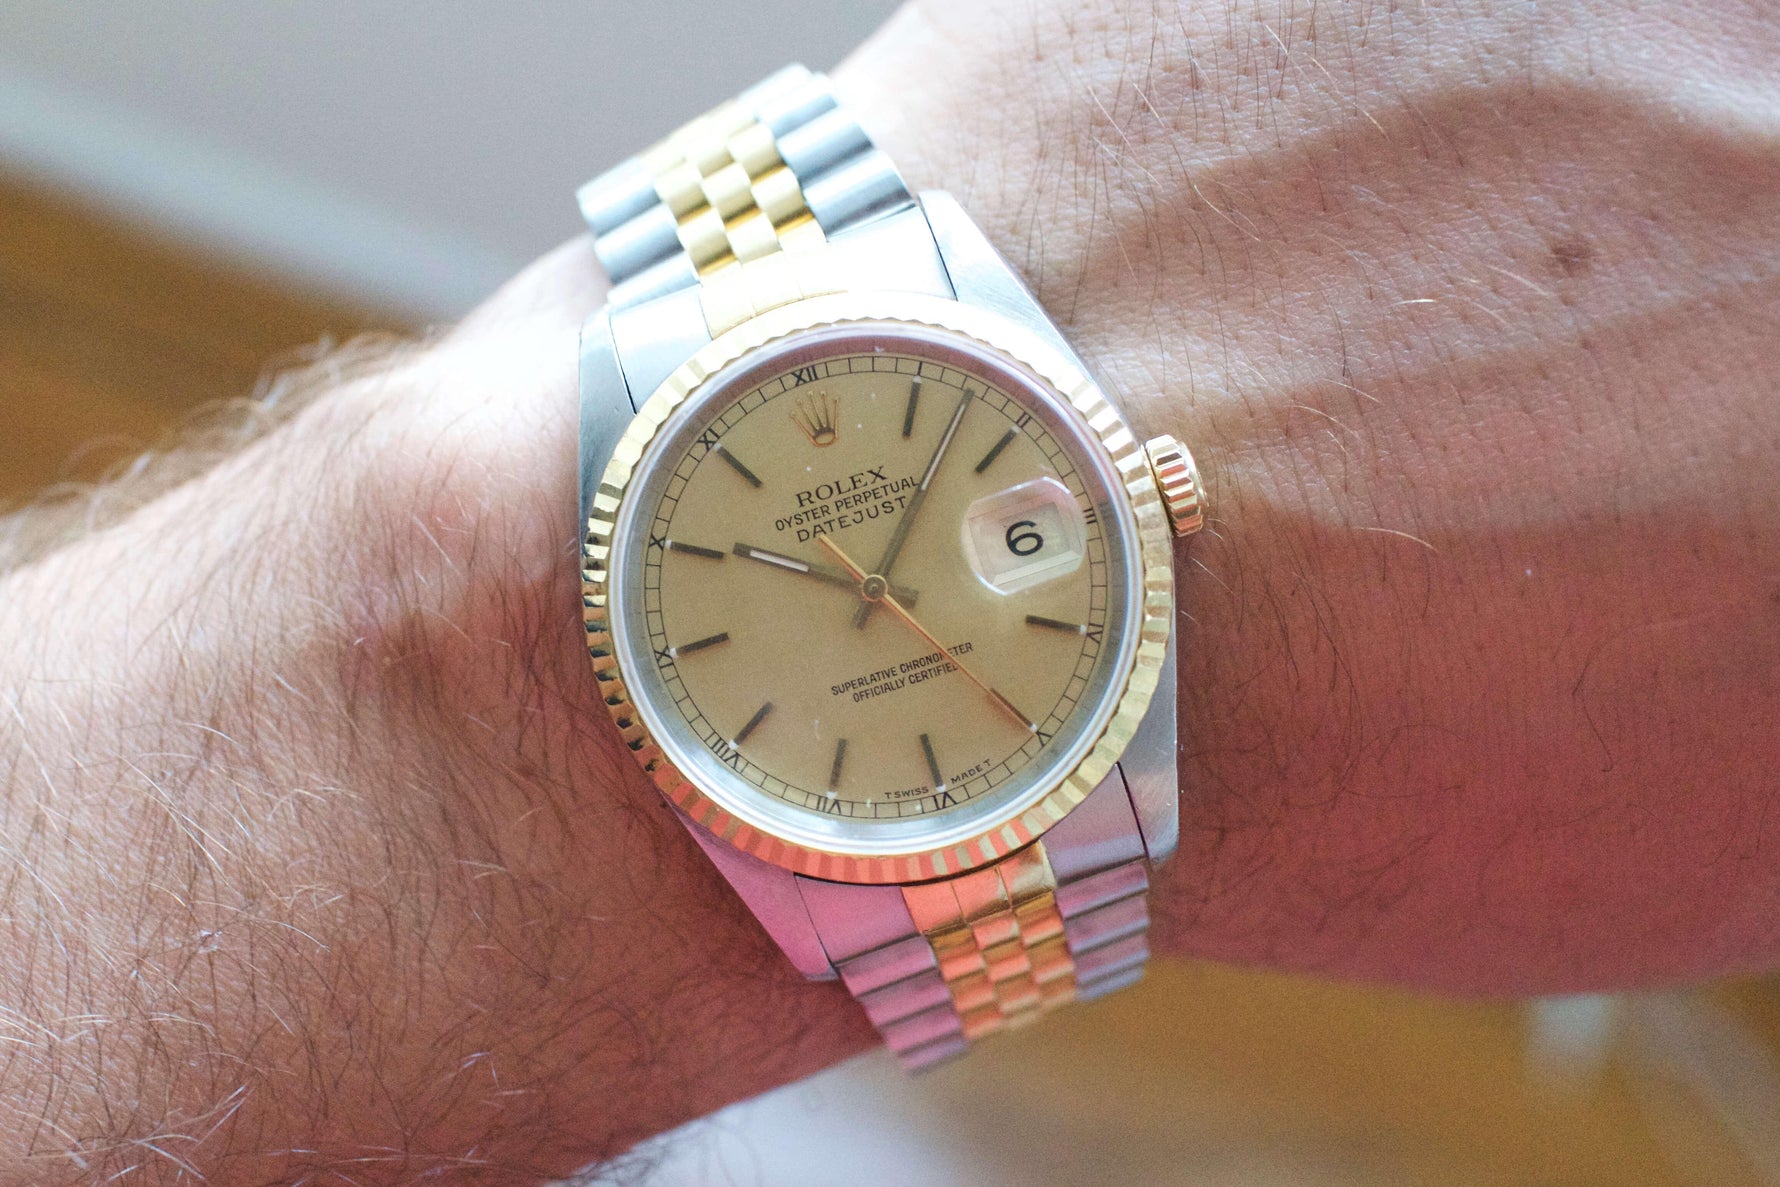 SOLDOUT: Rolex DateJust 36mm LINEN DIAL 18K Two-Tone HOLES Champagne Jubilee Watch 16233 - WearingTime Luxury Watches